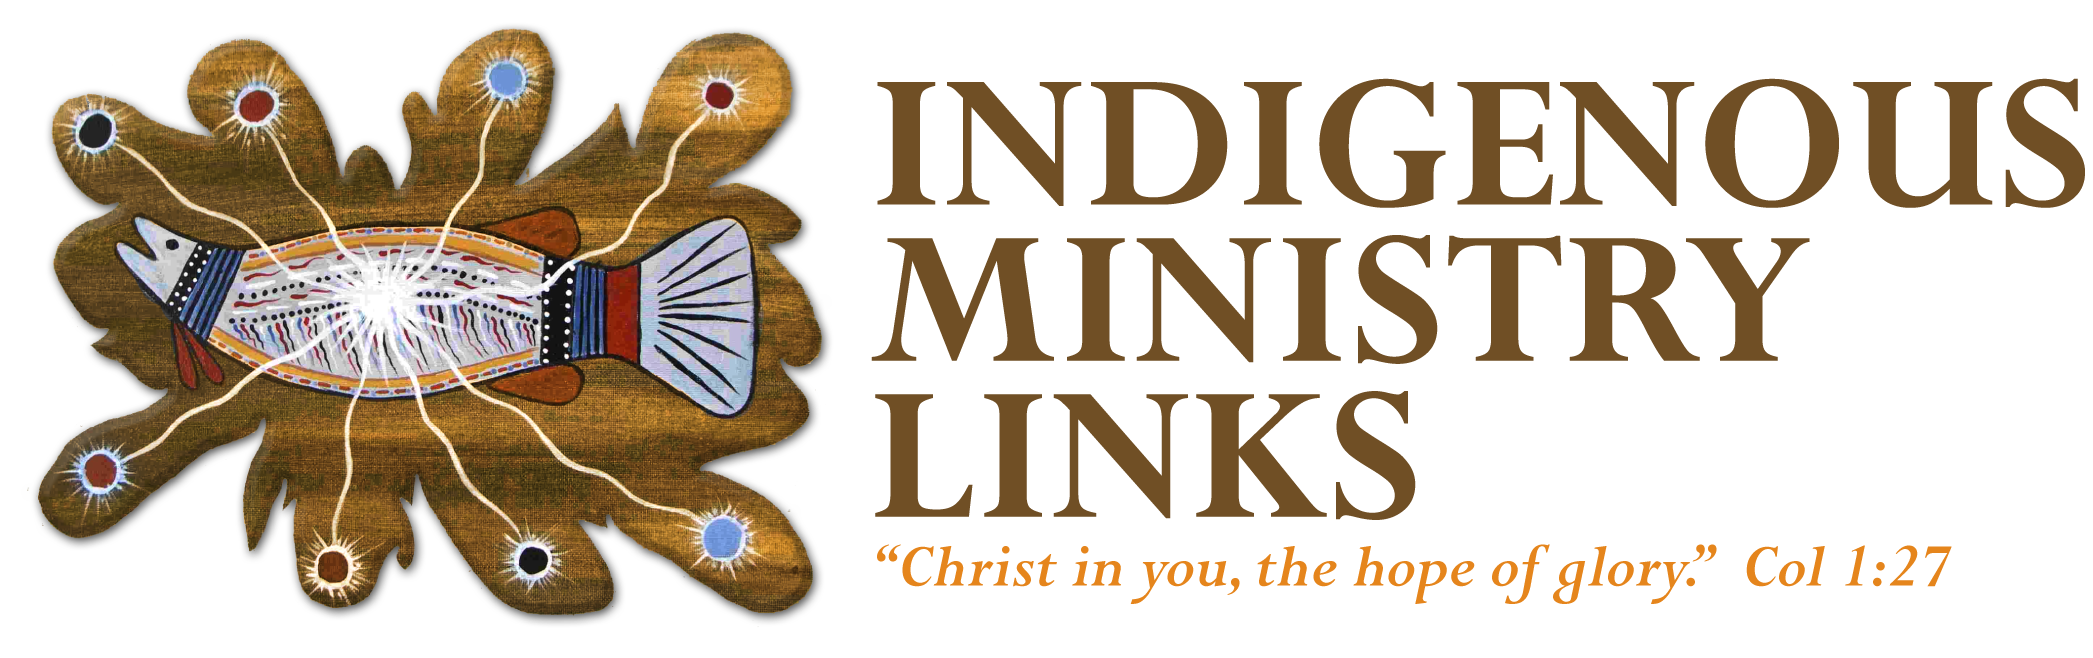 Indigenous Ministry Links - Aboriginal Christian Ministry, Queensland, NT Australia